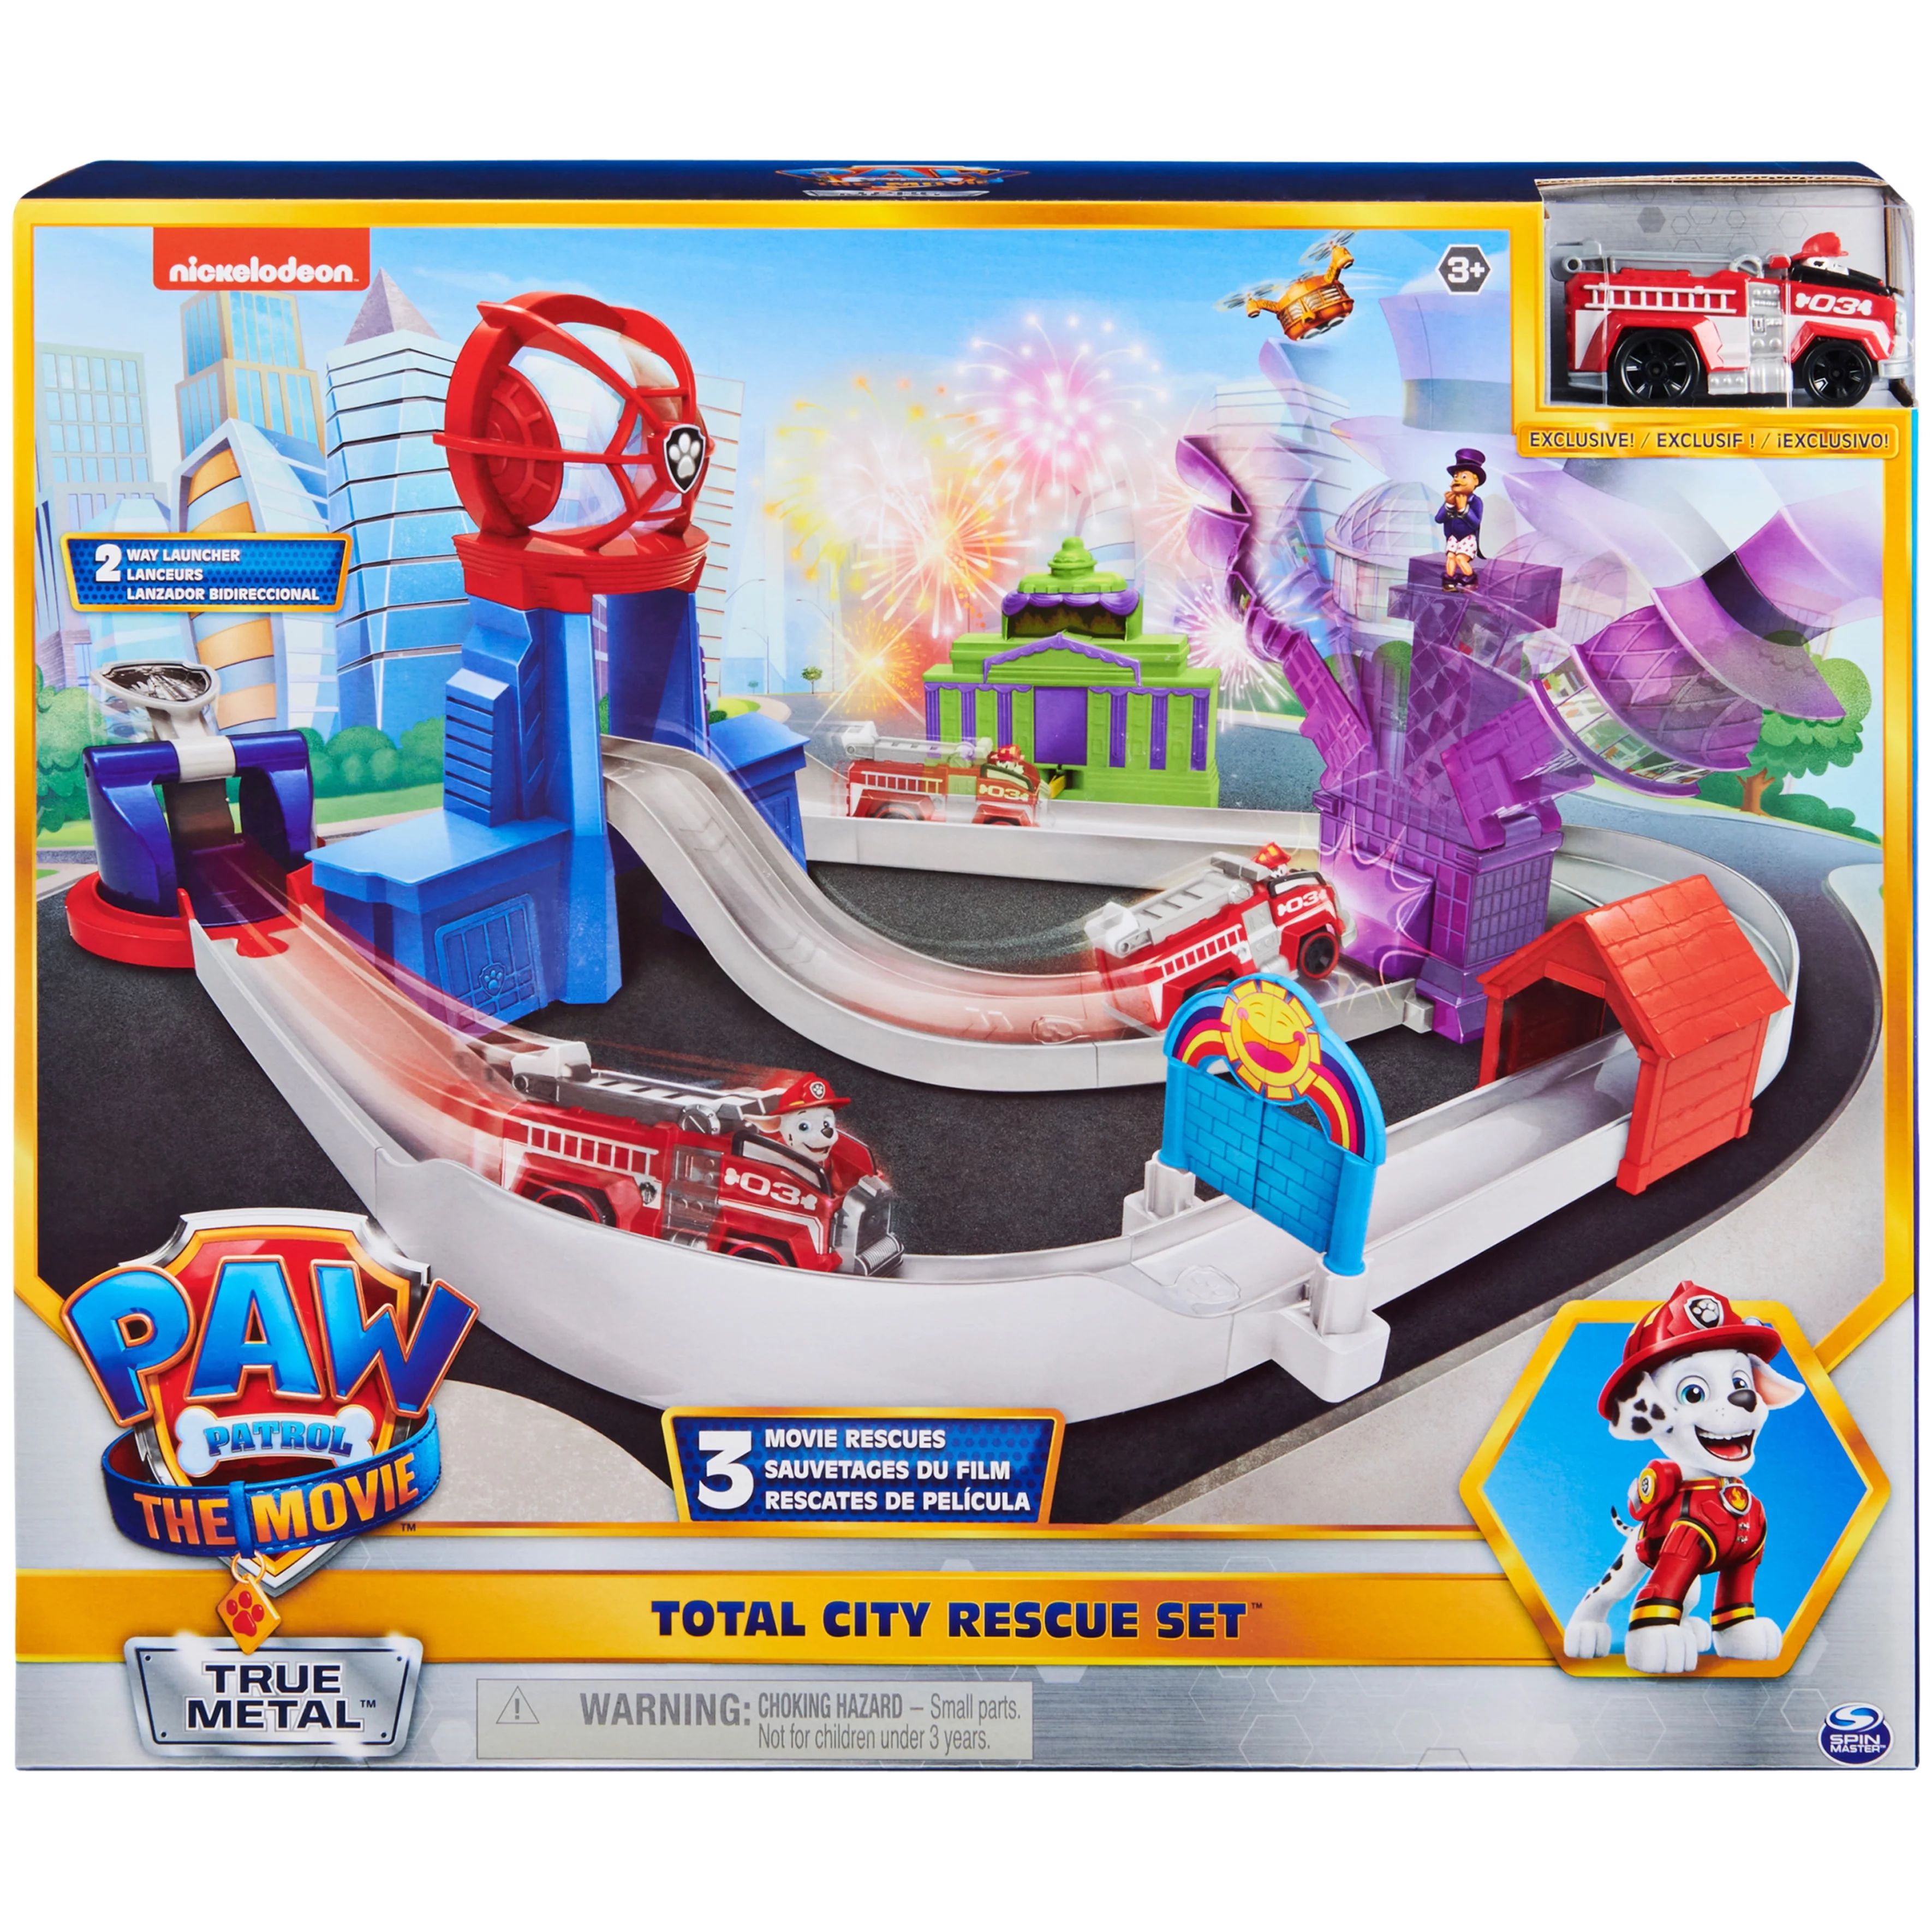 PAW Patrol, True Metal Total City Rescue Vehicle Playset, 1:55 Scale, for Ages 3 and up | Walmart (US)